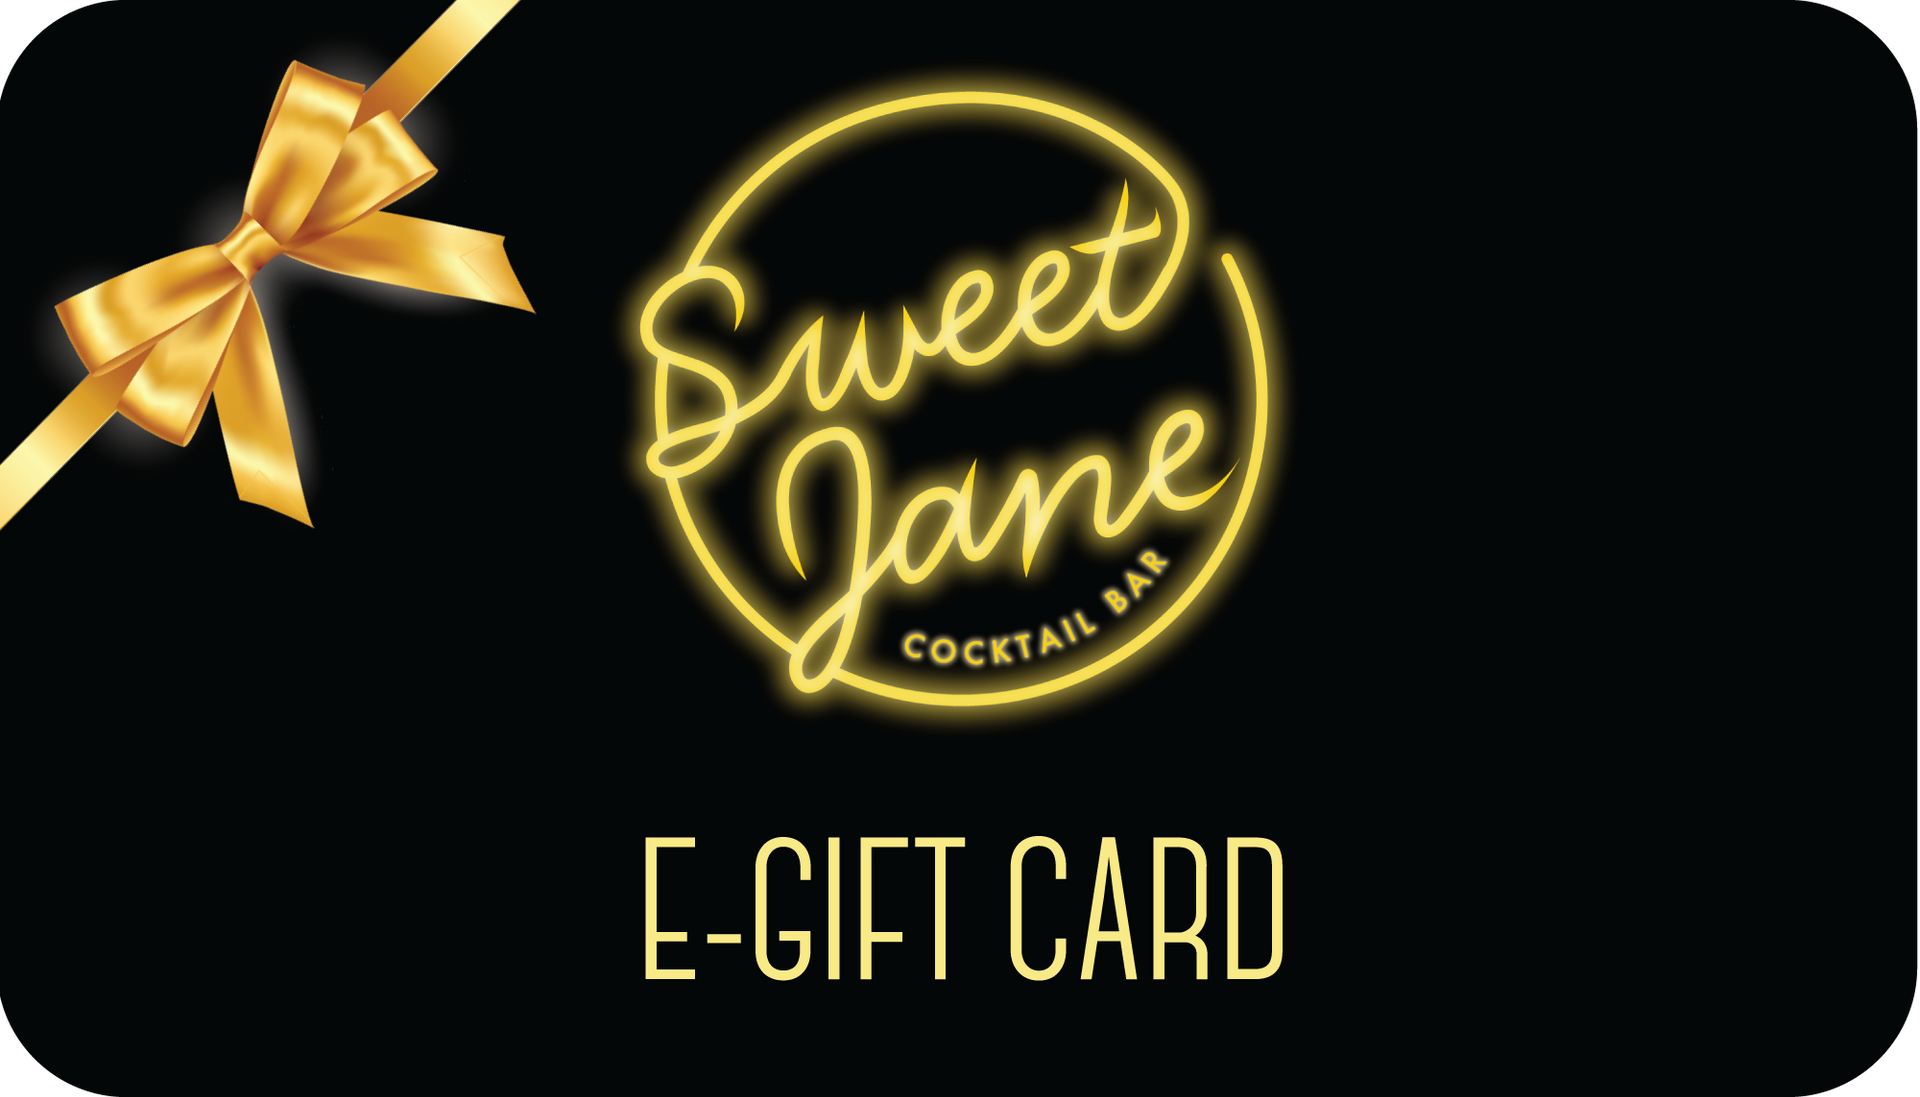 A sweet jane e-gift card with a gold bow.